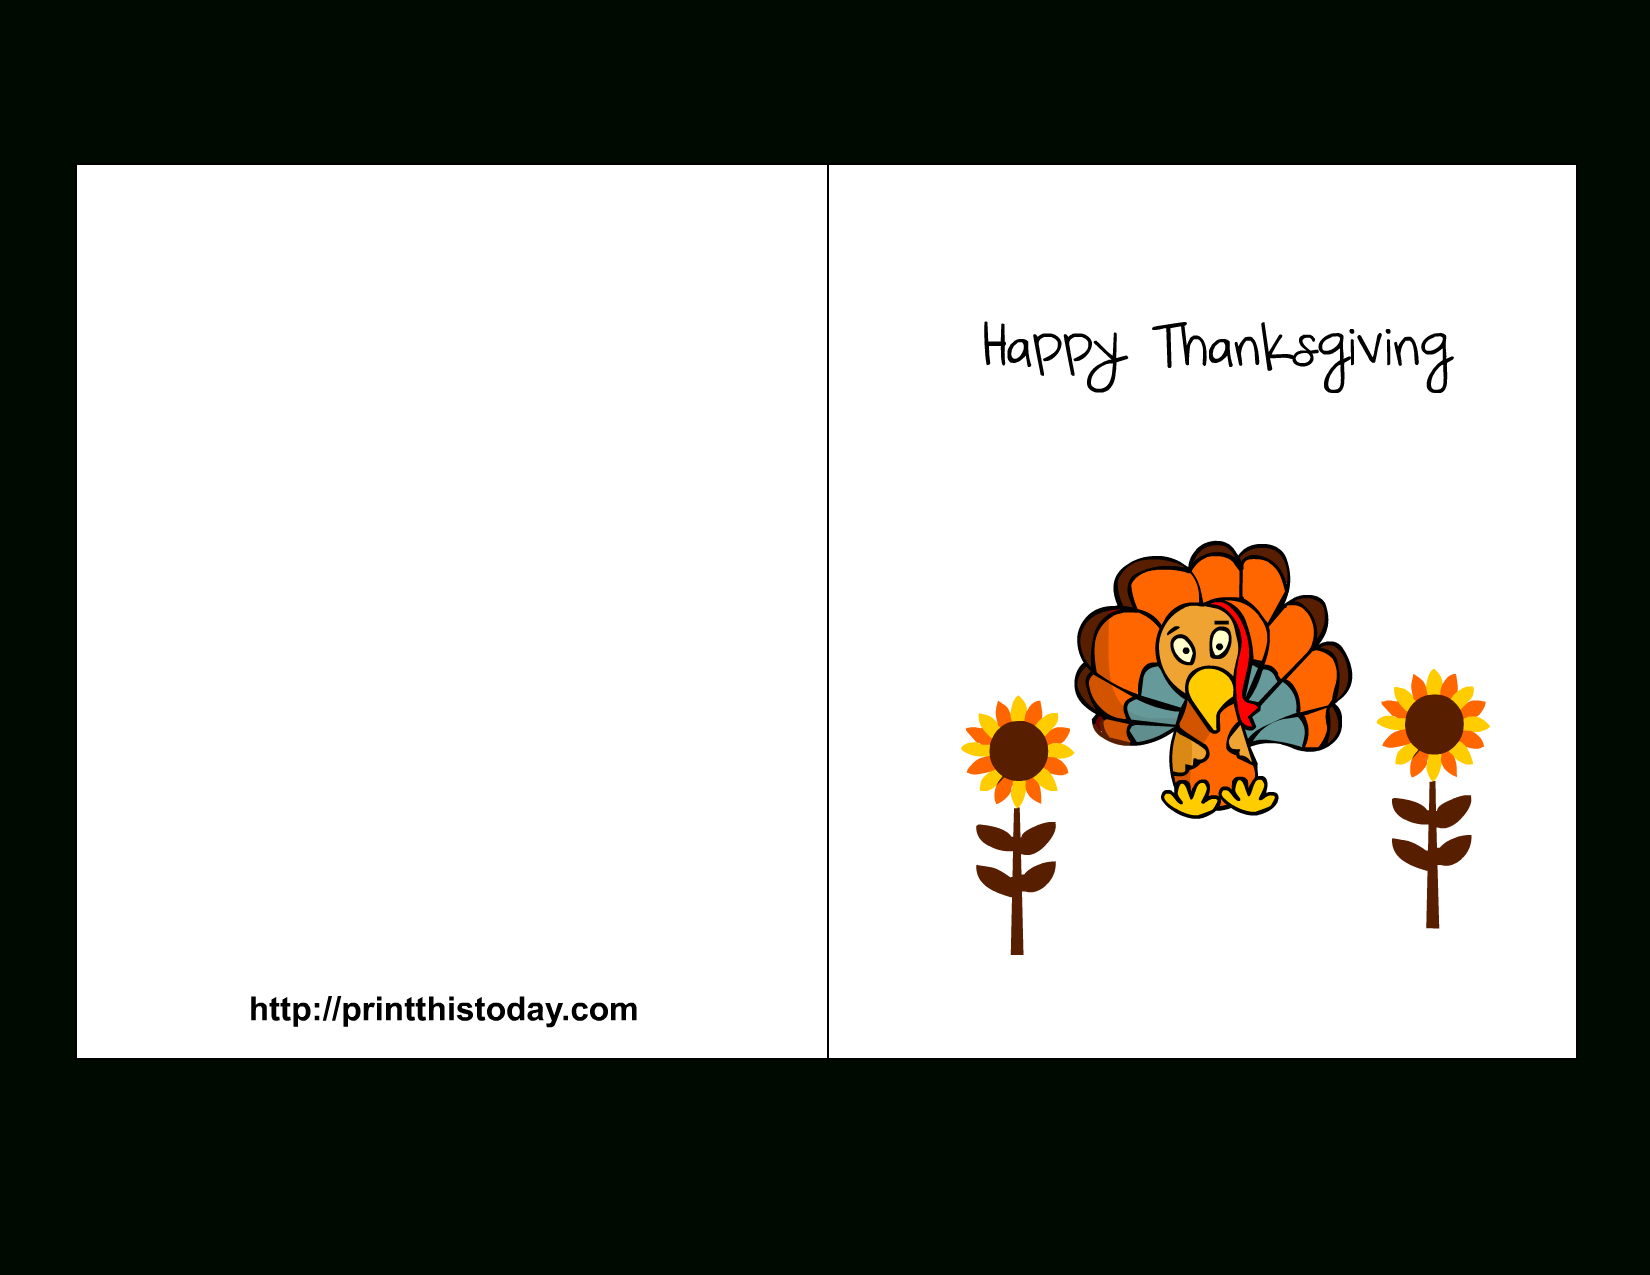 Printable Thanksgiving Card | Events | Free Printable Calendar - Happy Thanksgiving Cards Free Printable